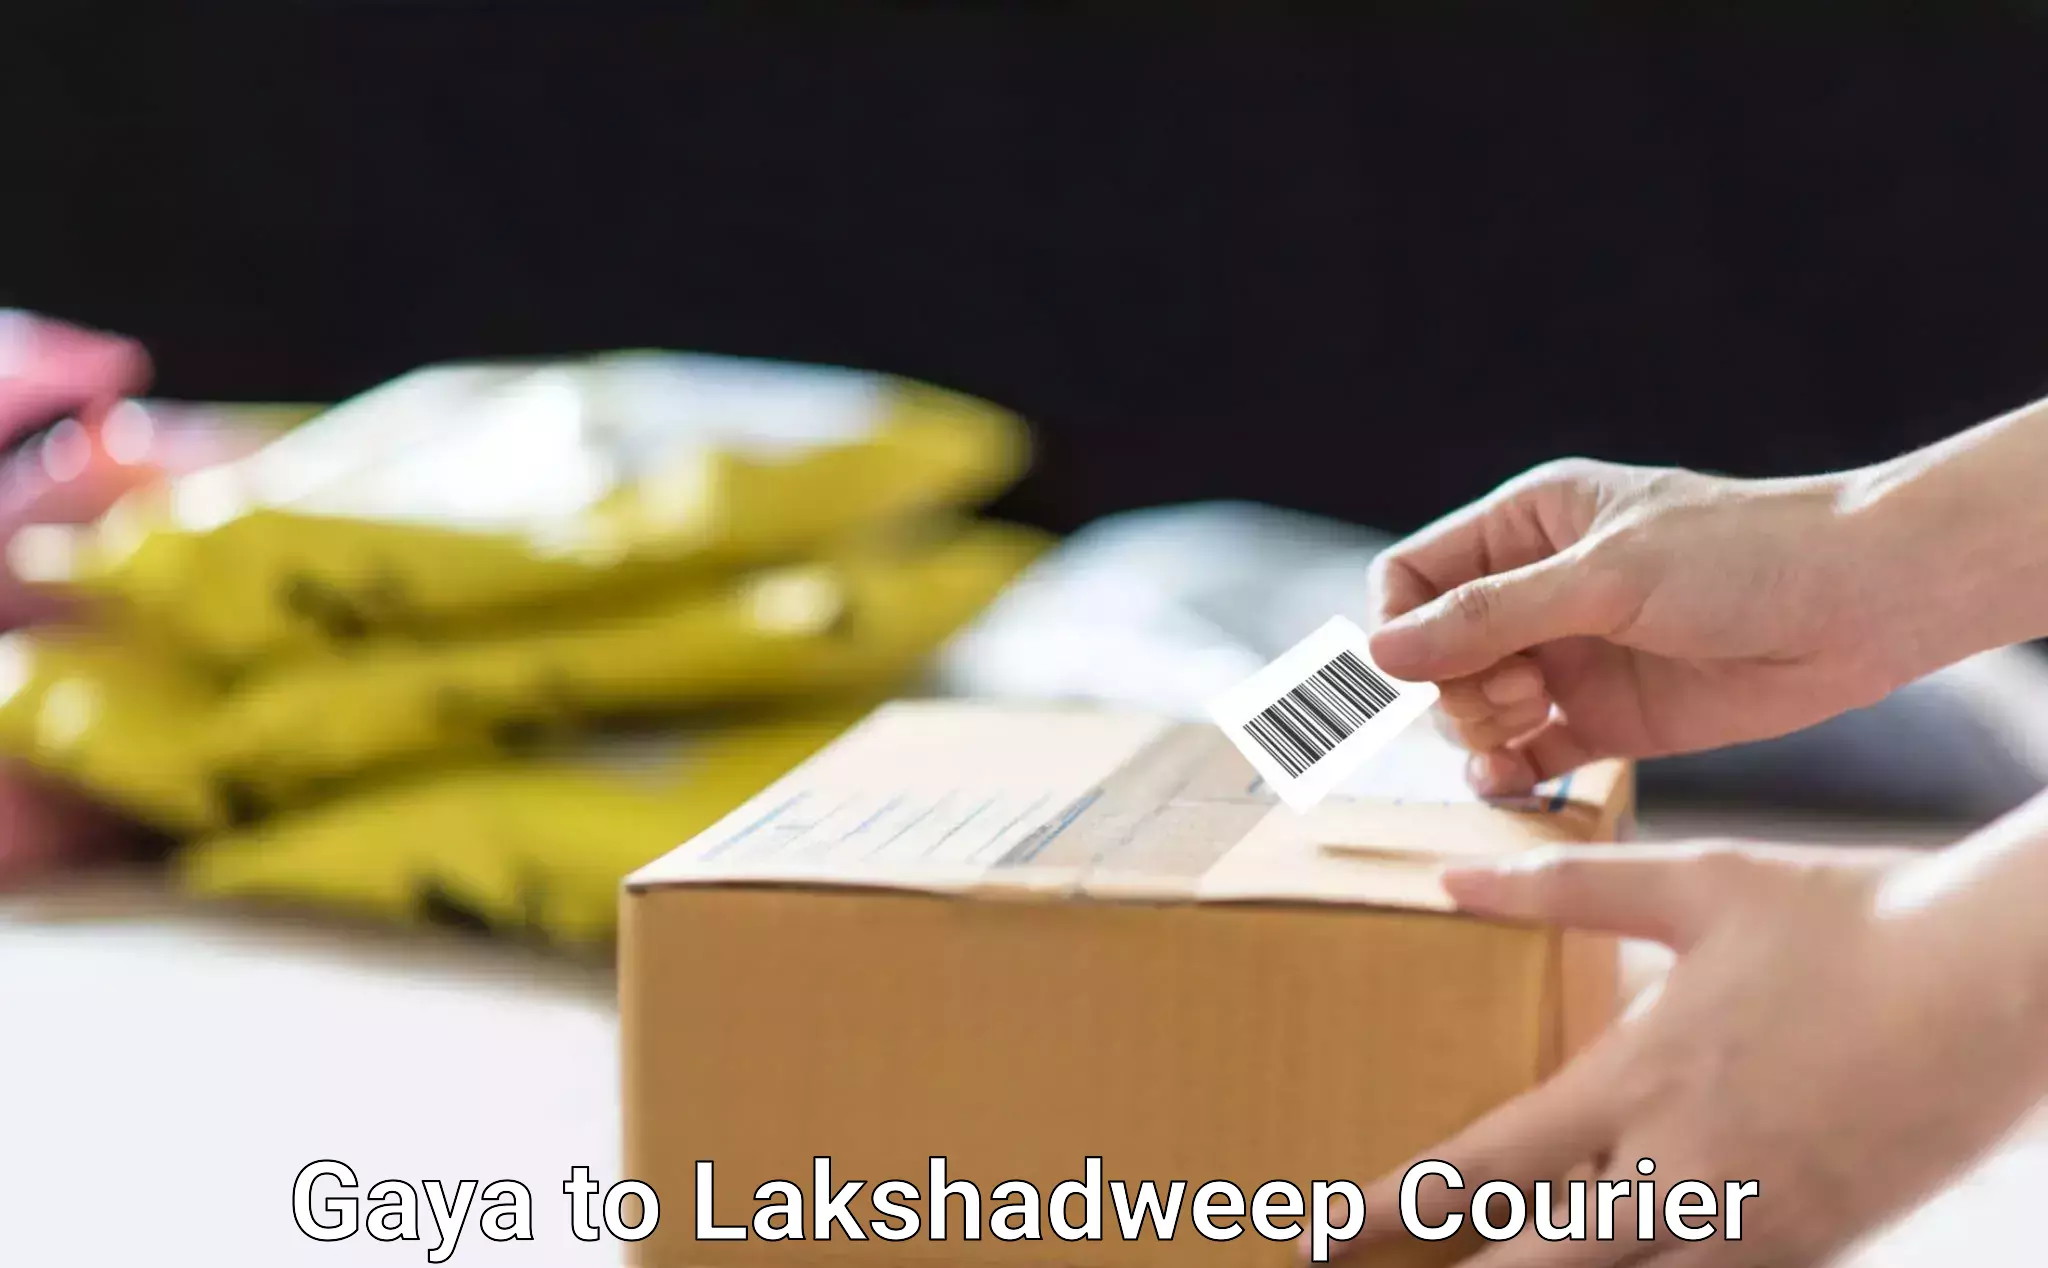 Professional movers and packers in Gaya to Lakshadweep